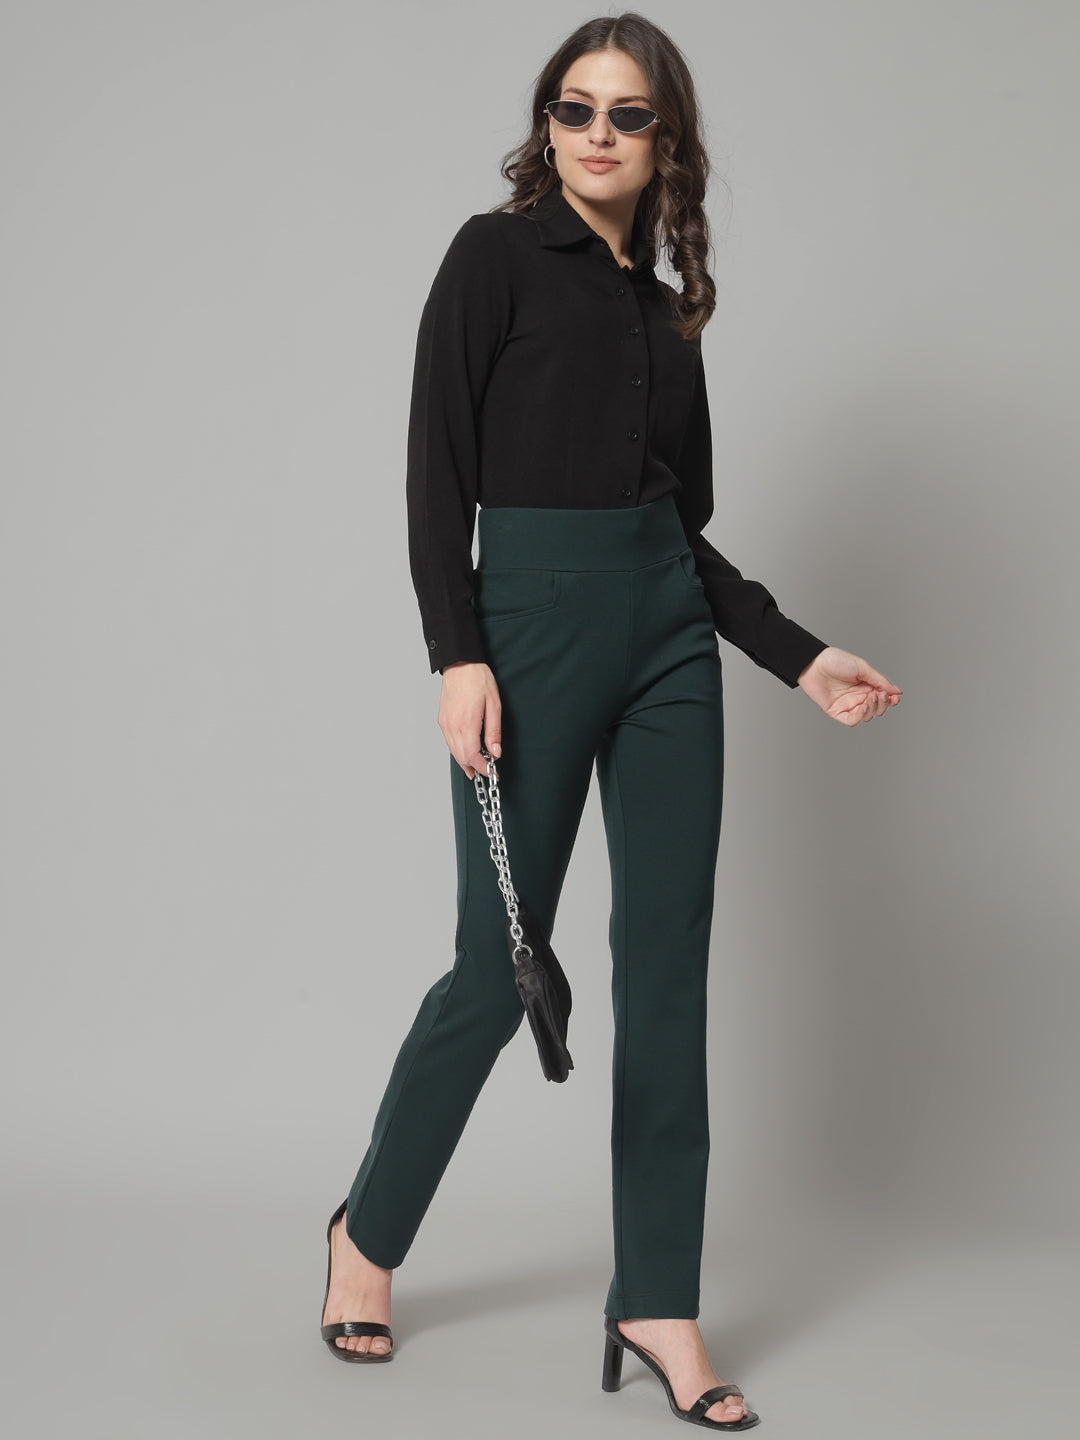 Buy Black Lady Women's Slim Fit Cotton Lycra Trouser Pant/Semi Casual  Trouser for Women/Women's Trouser for Daily Office and Casual Wear/Biege /  2 Pockets/L-5XL at